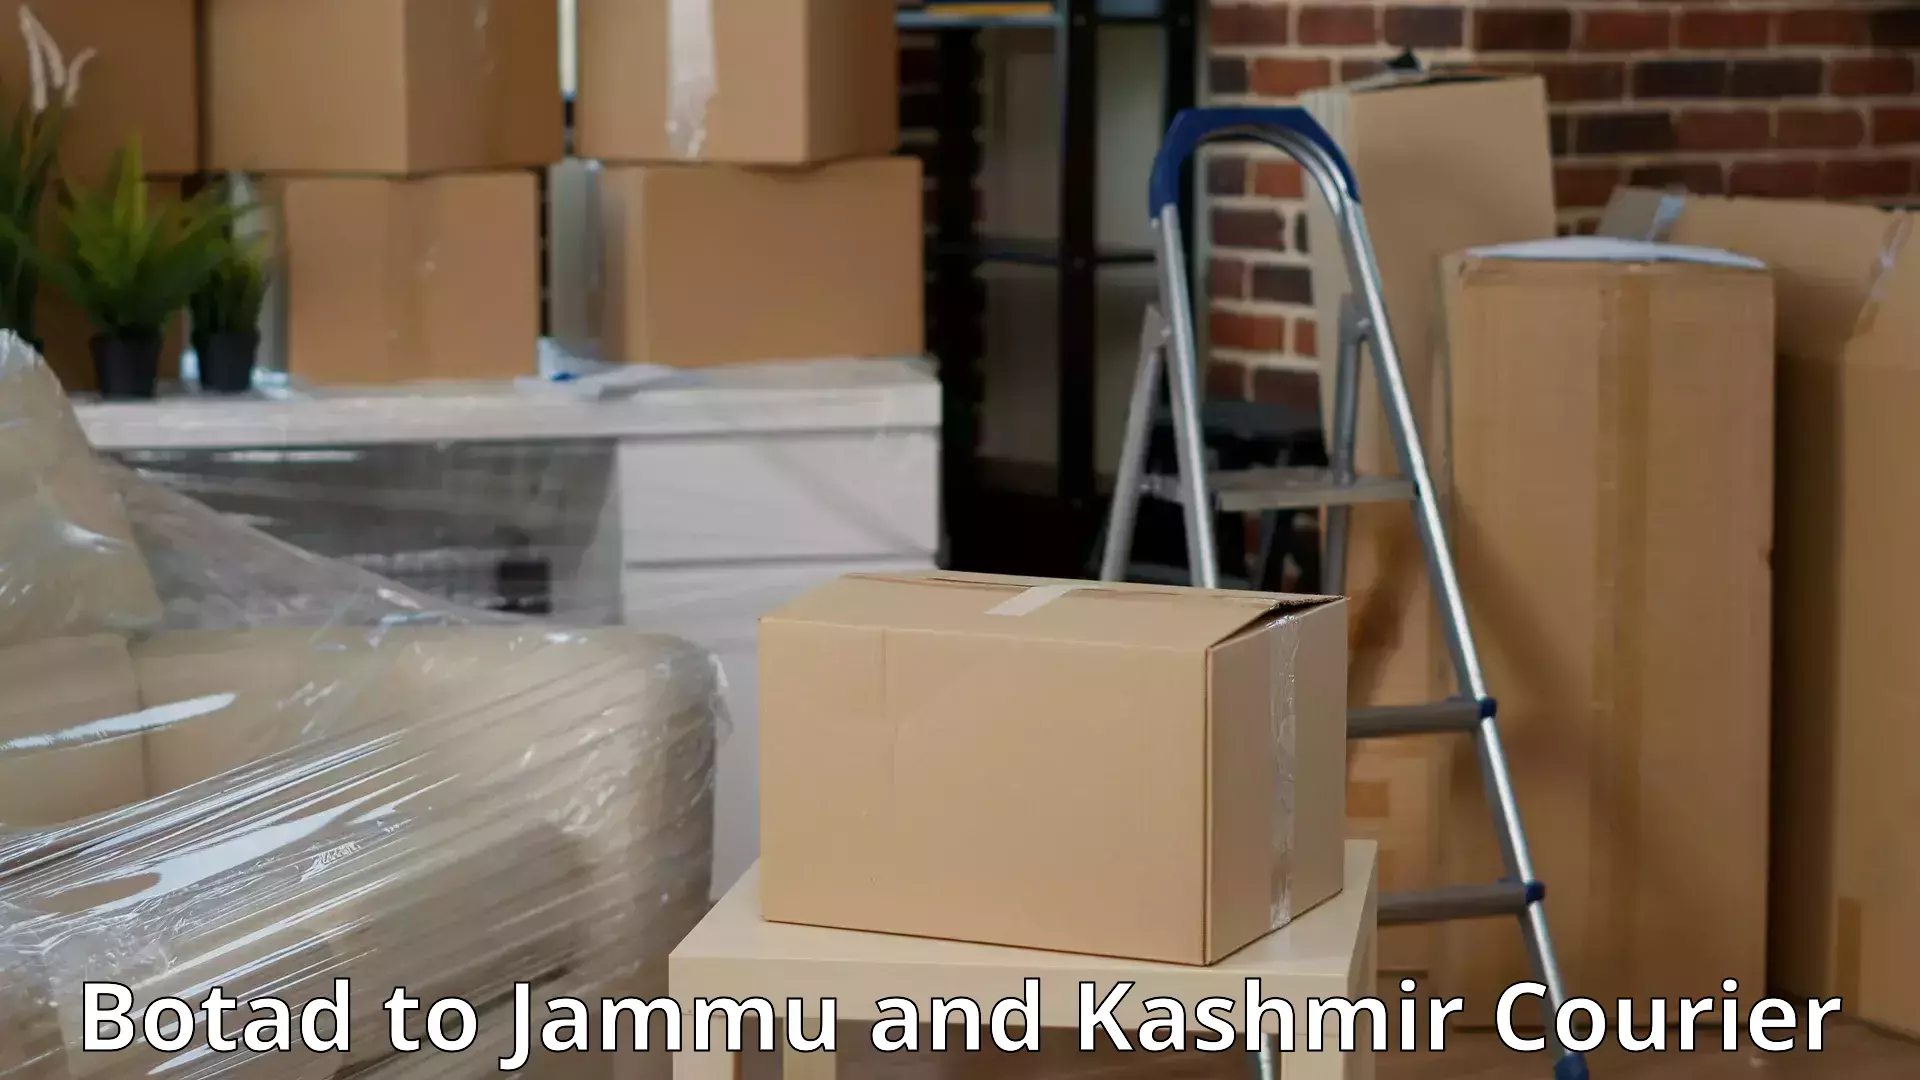 Efficient relocation services Botad to Jammu and Kashmir